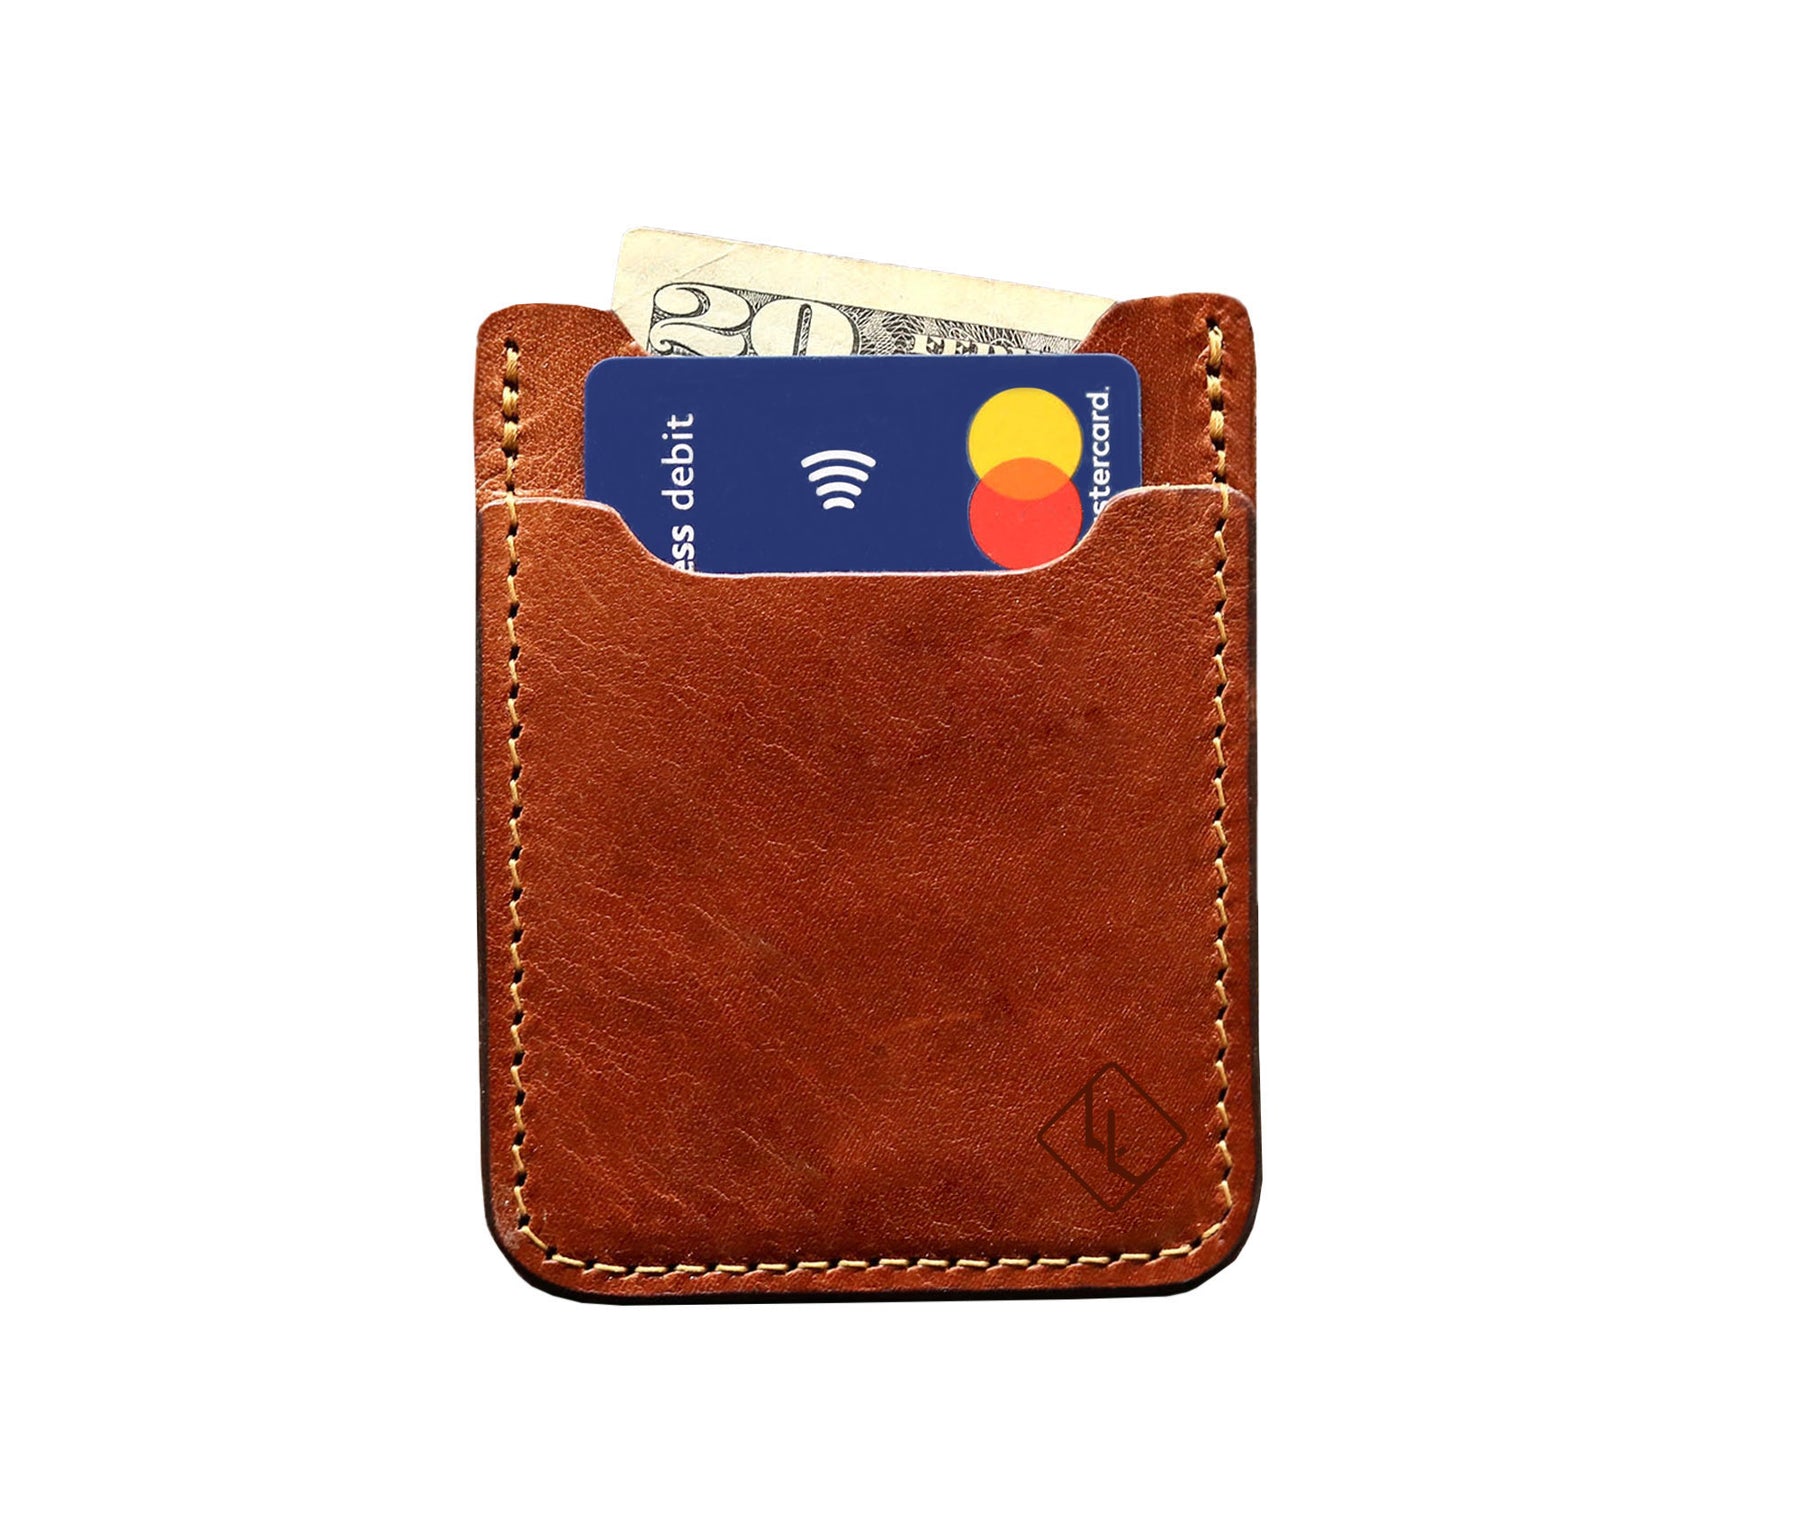 New ! - The Minimalist Ultra Slim Wallet - Made with Full Grain Napa Excel Leather